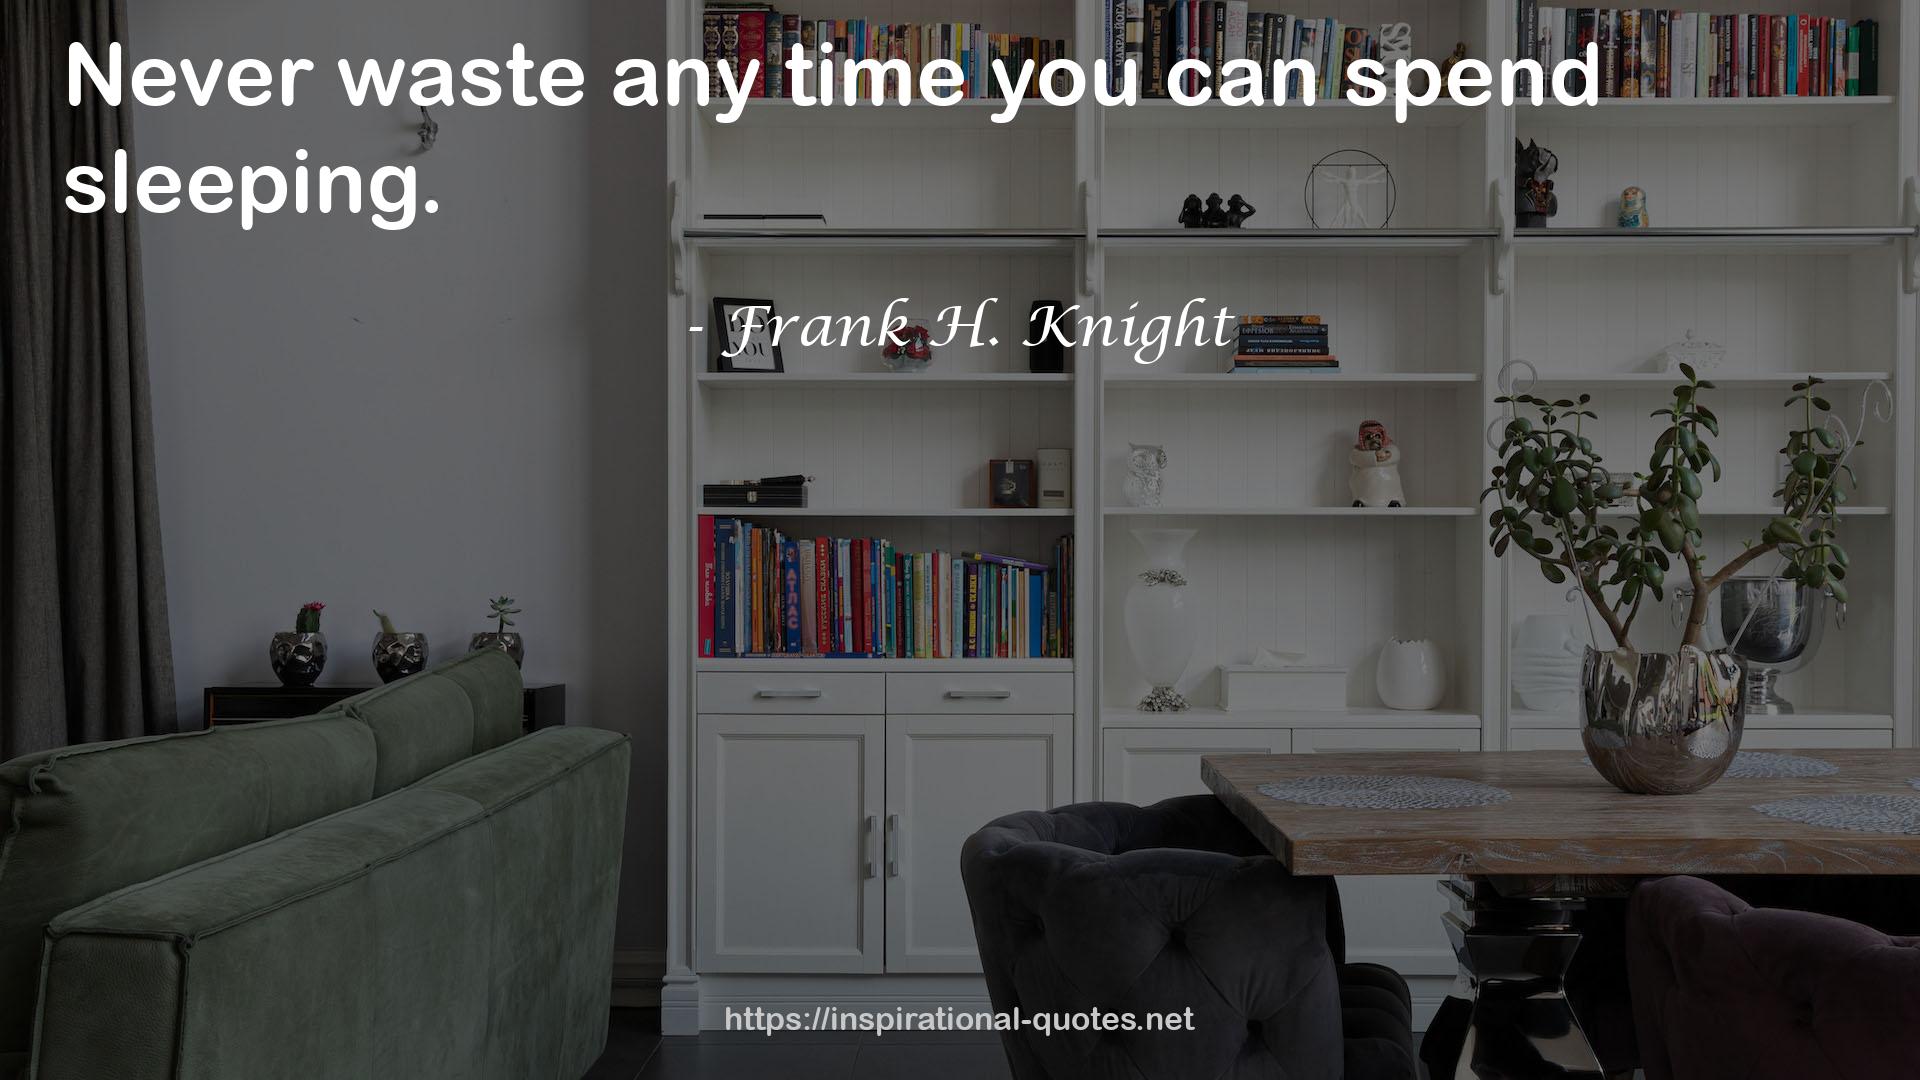 Frank H. Knight QUOTES